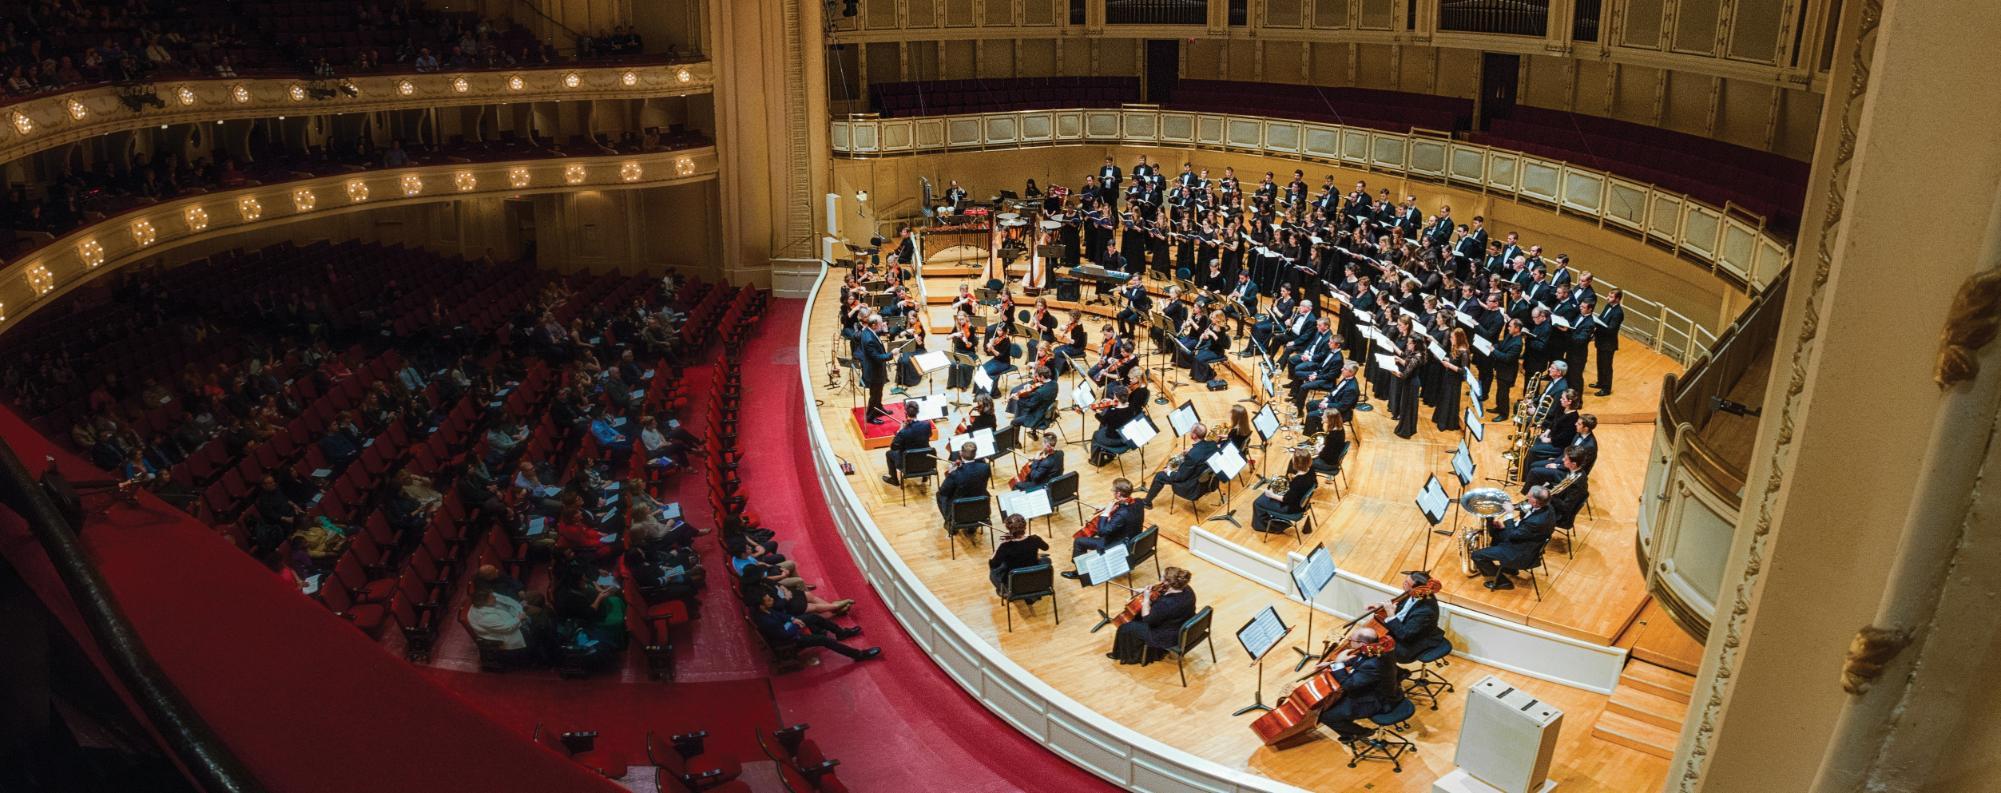 The BJU Chorage and Symphony Orchestra perform Dan Forrest